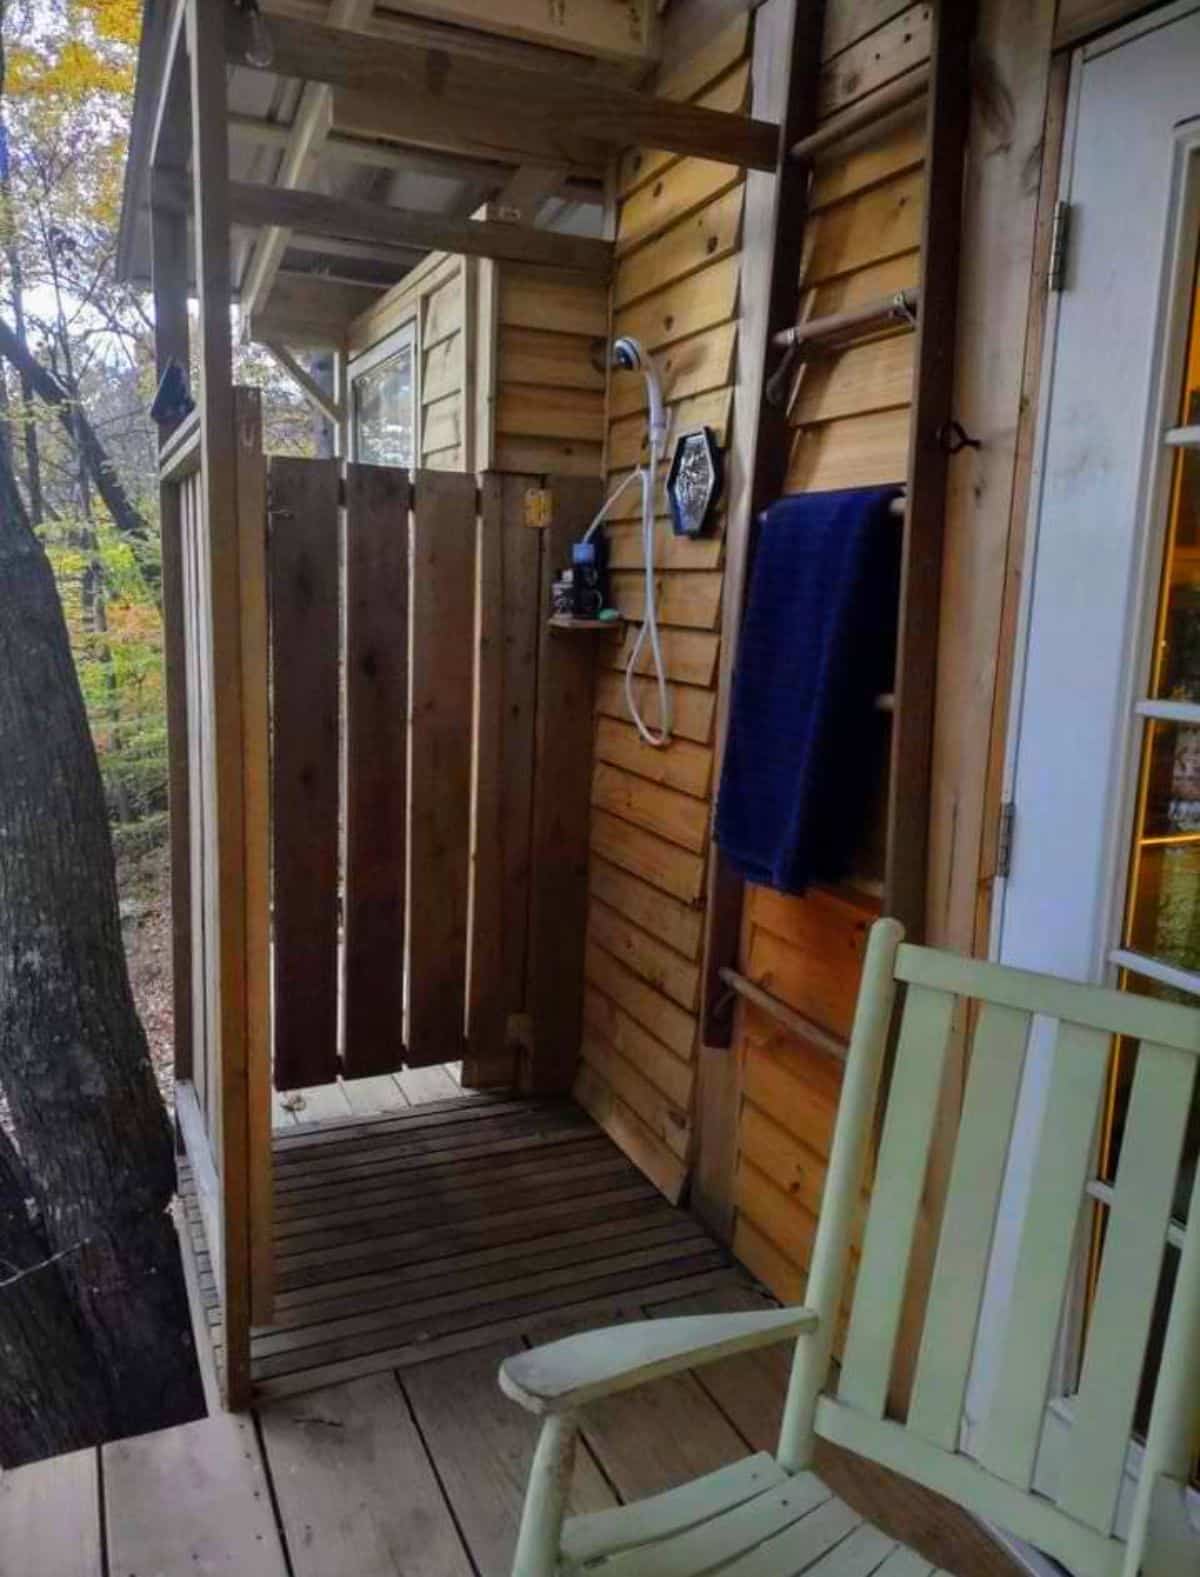 Ray’s Cabin Off-the-Grid Tiny House outdoor shower.